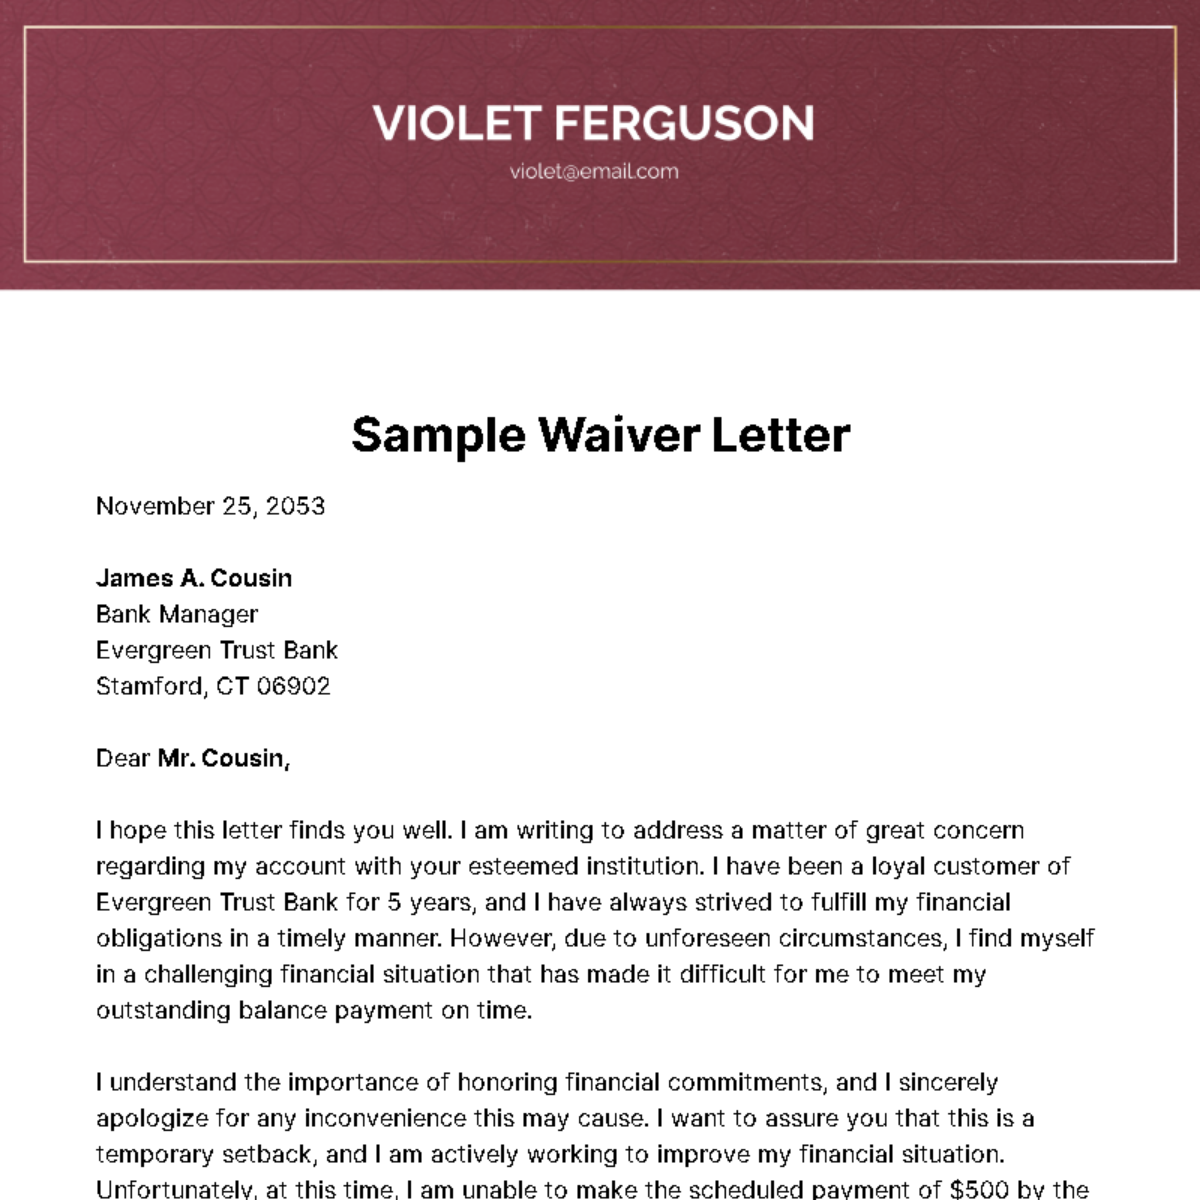 Sample Waiver Letter Template